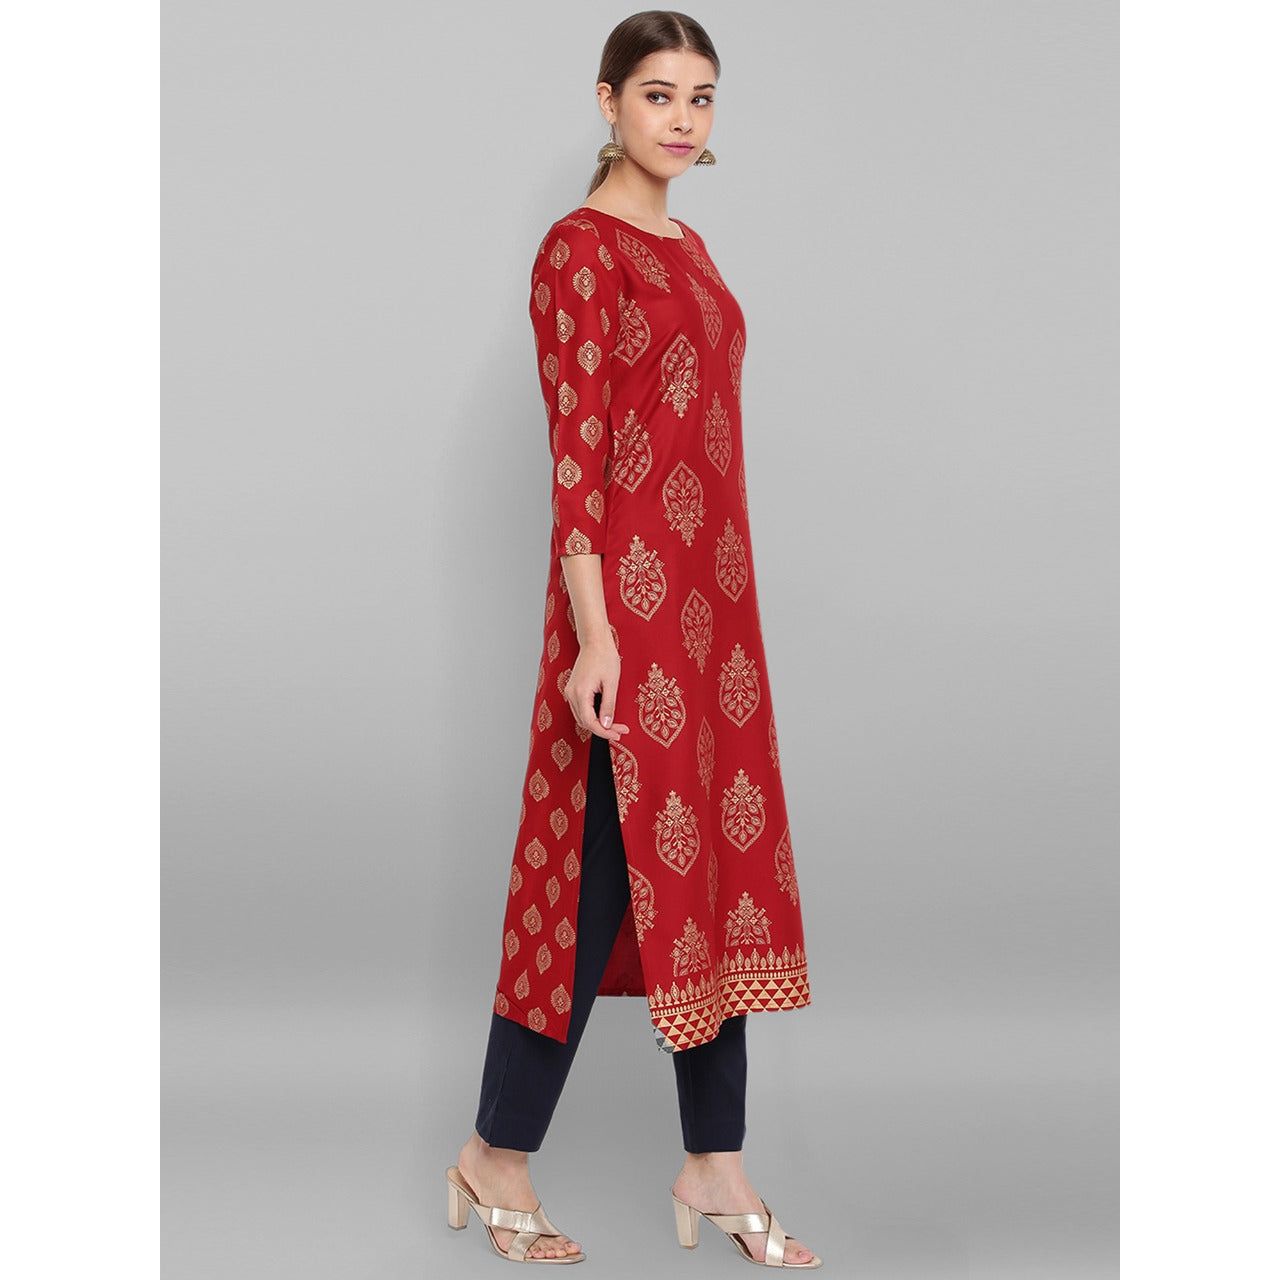 Red and Gold Indian Tunic Top/ Kurta For Women